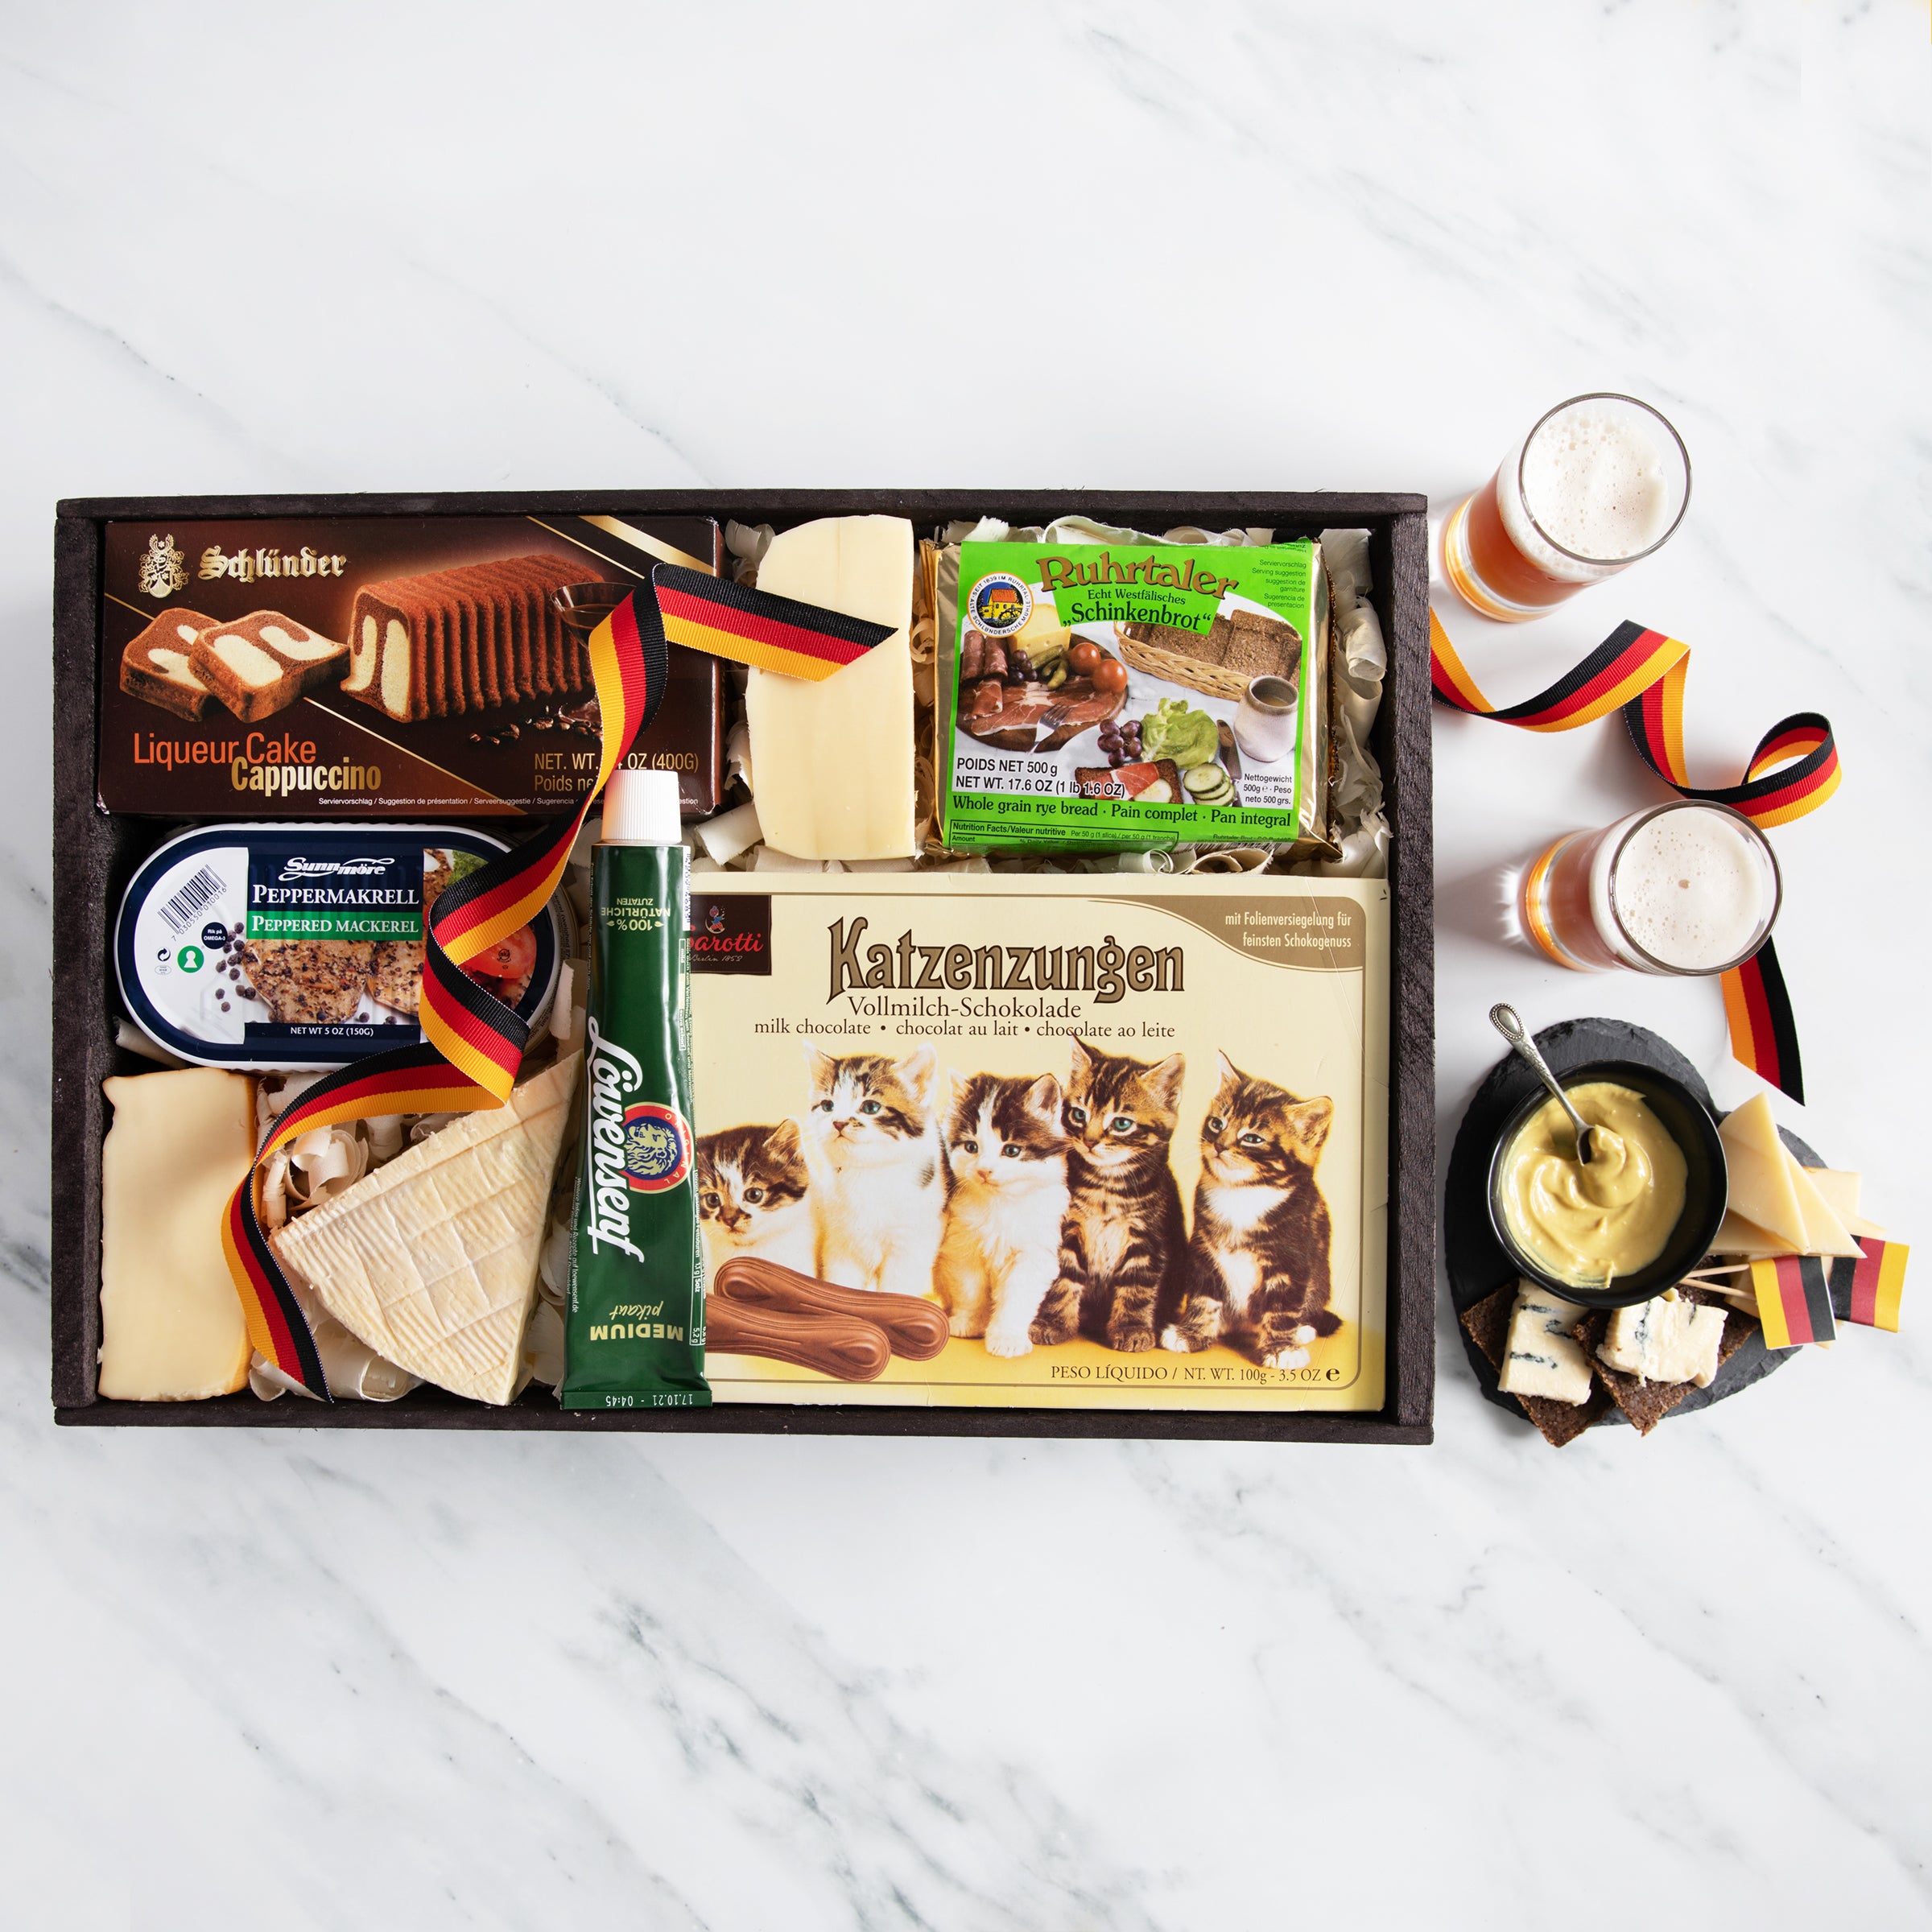 Gift giving - German business etiquette, manners, customs in Germany